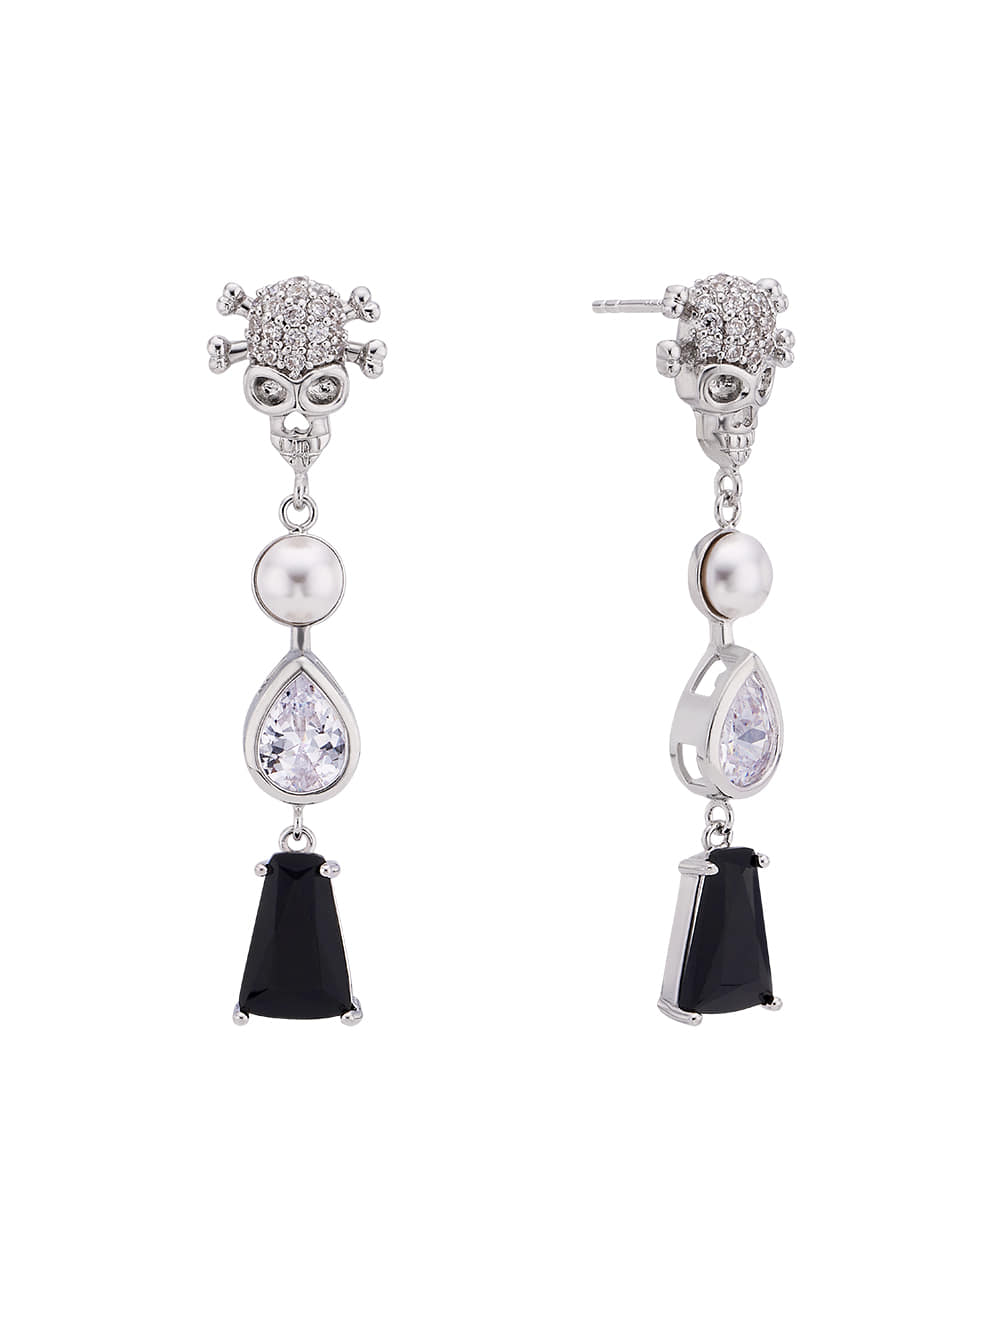 MAGNIFICENT STONE EARRINGS